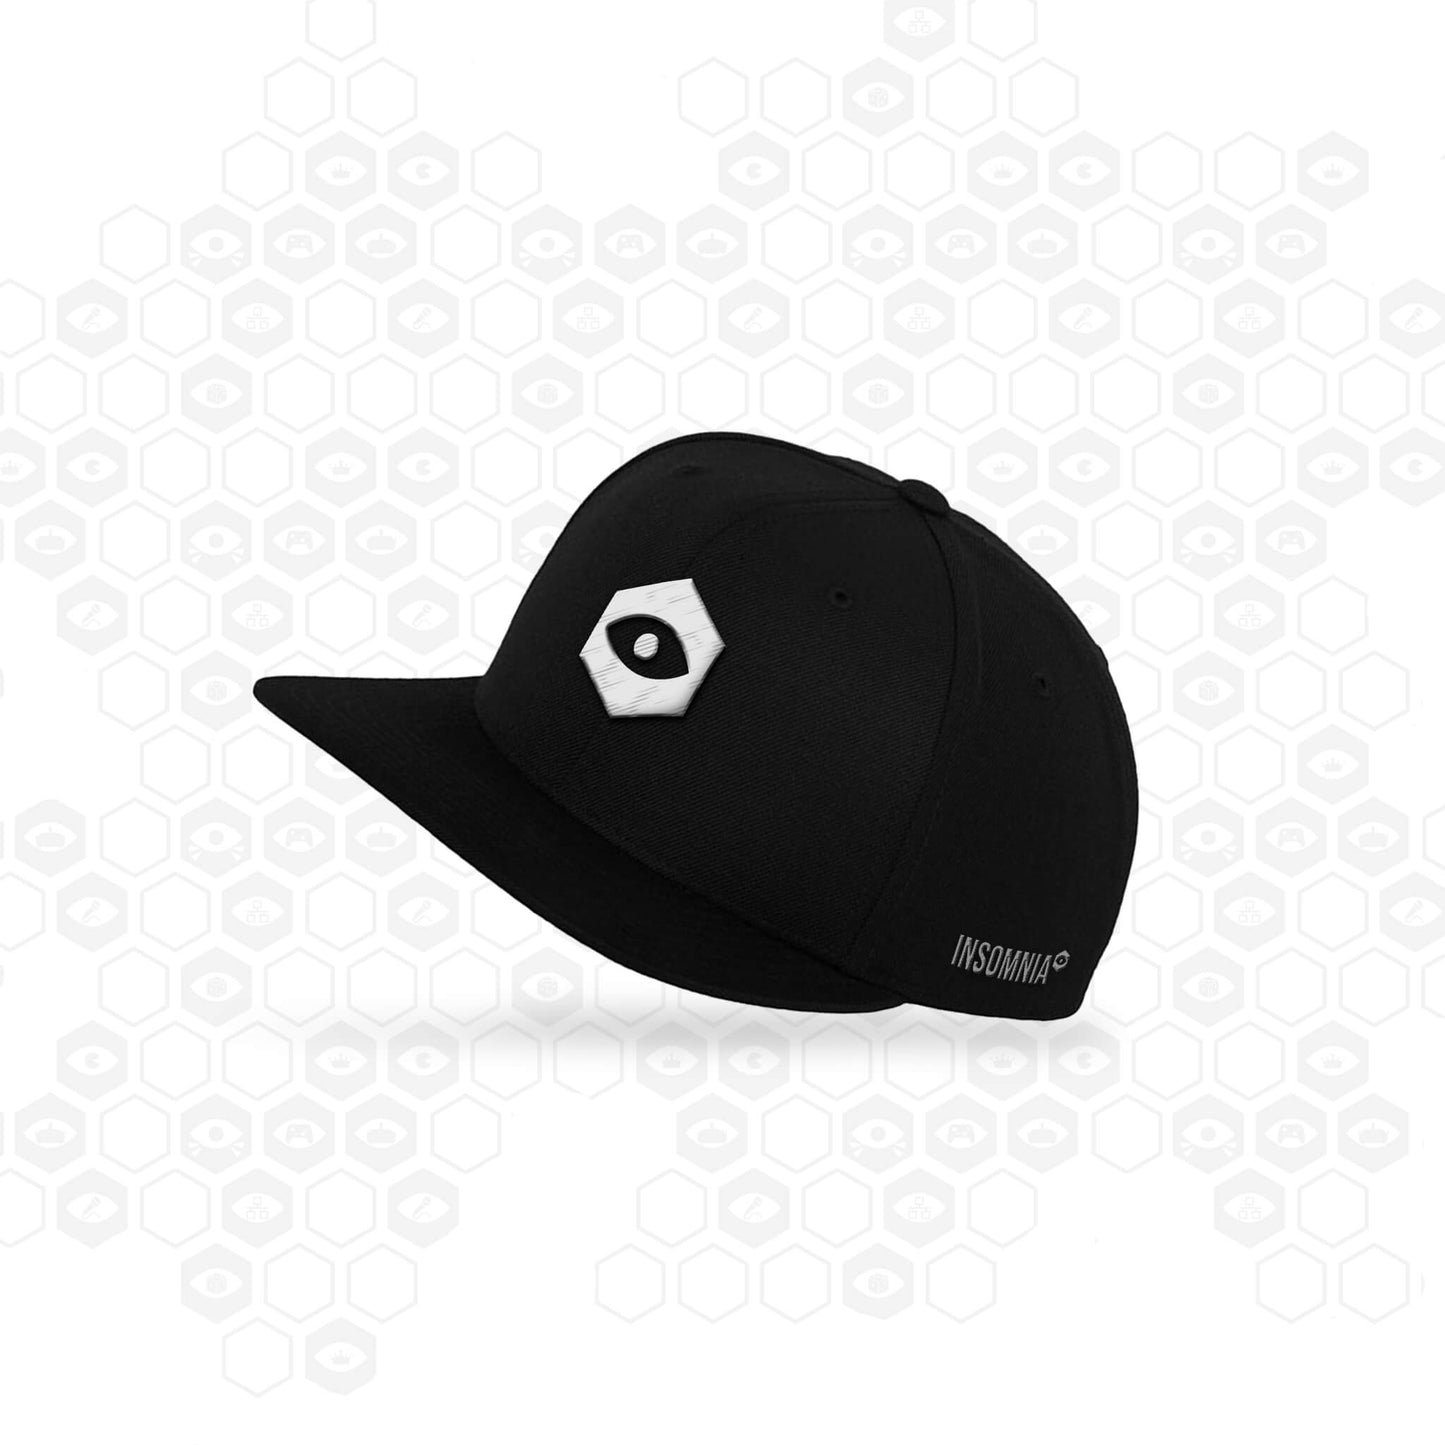 Black snapback style cap with the insomnia eye embroidered on the fron and insomnia logo on the side